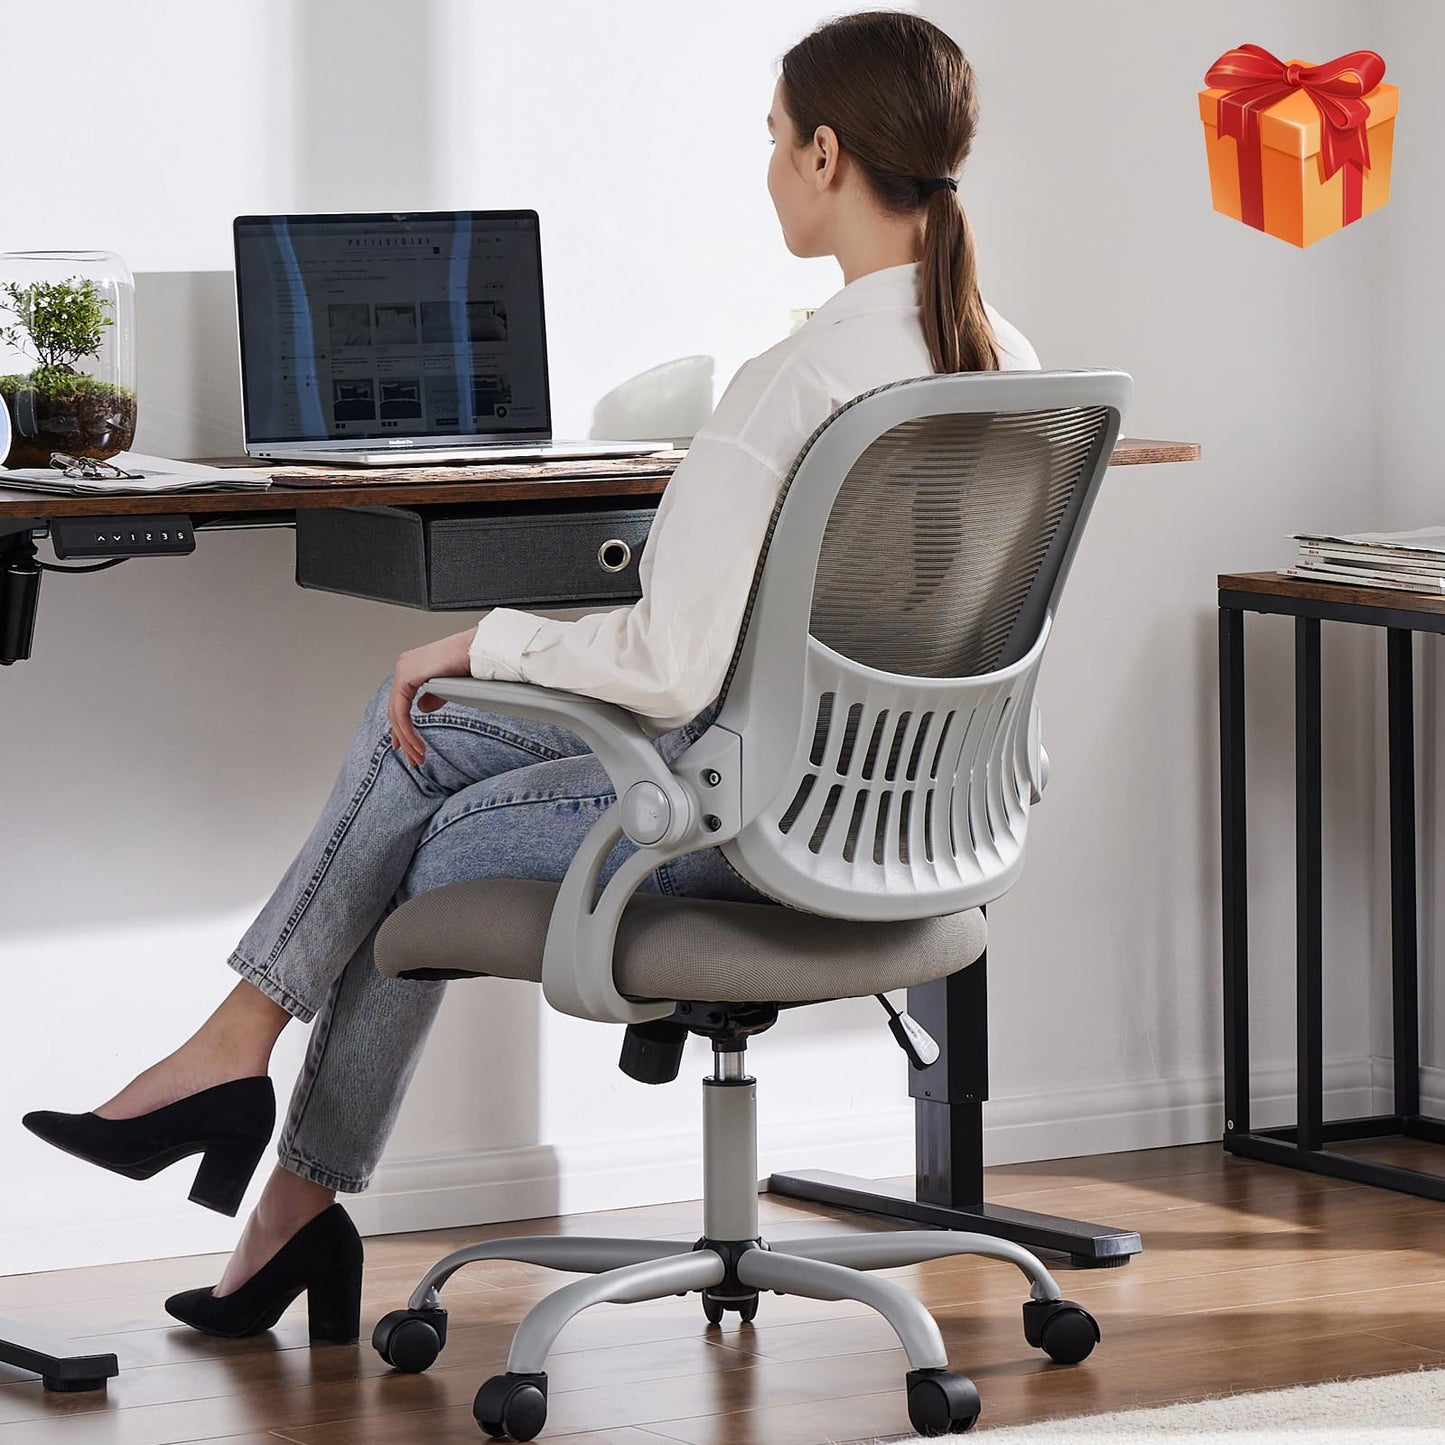 Sweetcrispy Office Computer Desk Chair, Ergonomic Mid-Back Mesh Rolling Work Swivel Task Chairs with Wheels, Comfortable Lumbar Support, Comfy Flip-up Arms for Home, Bedroom, Study, Student, Grey